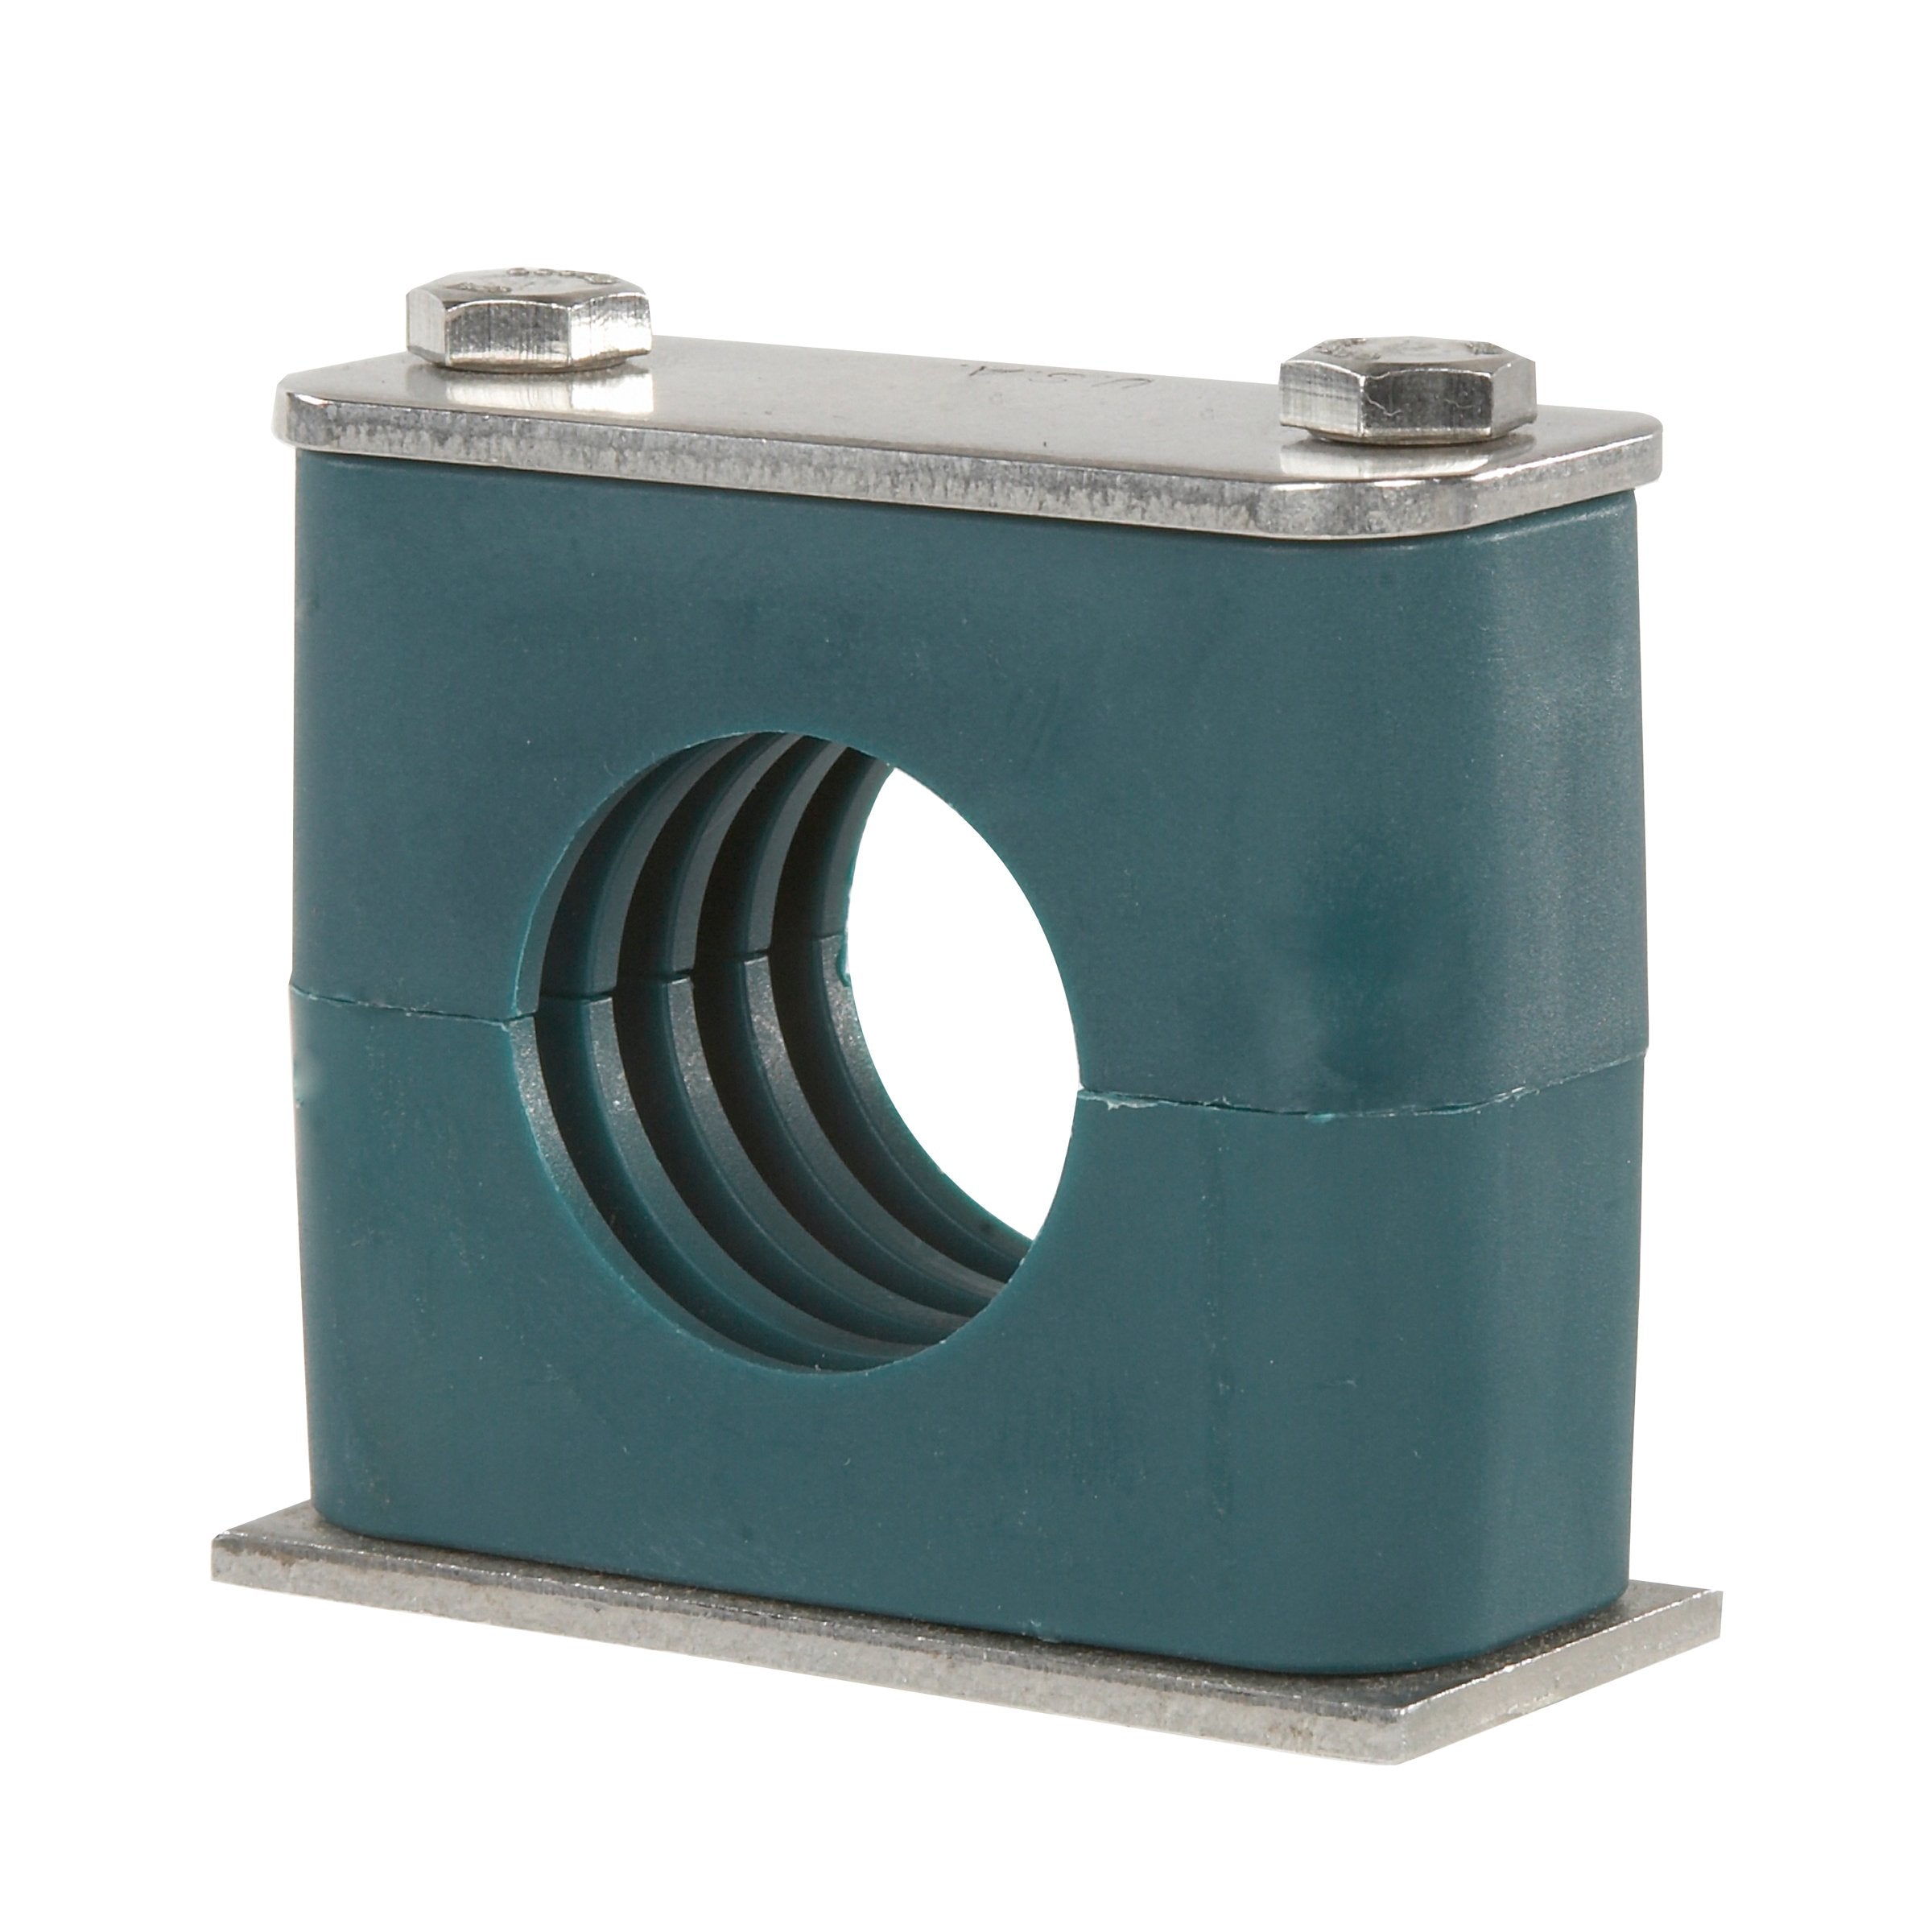 SP-213.5-PP-DP-AS-U-W10 : Stauff Clamp, Single Weld Plate, 0.53" (13.5mm) OD, for 1/4" Pipe, Green PP Insert, Profiled Interior, Carbon Steel